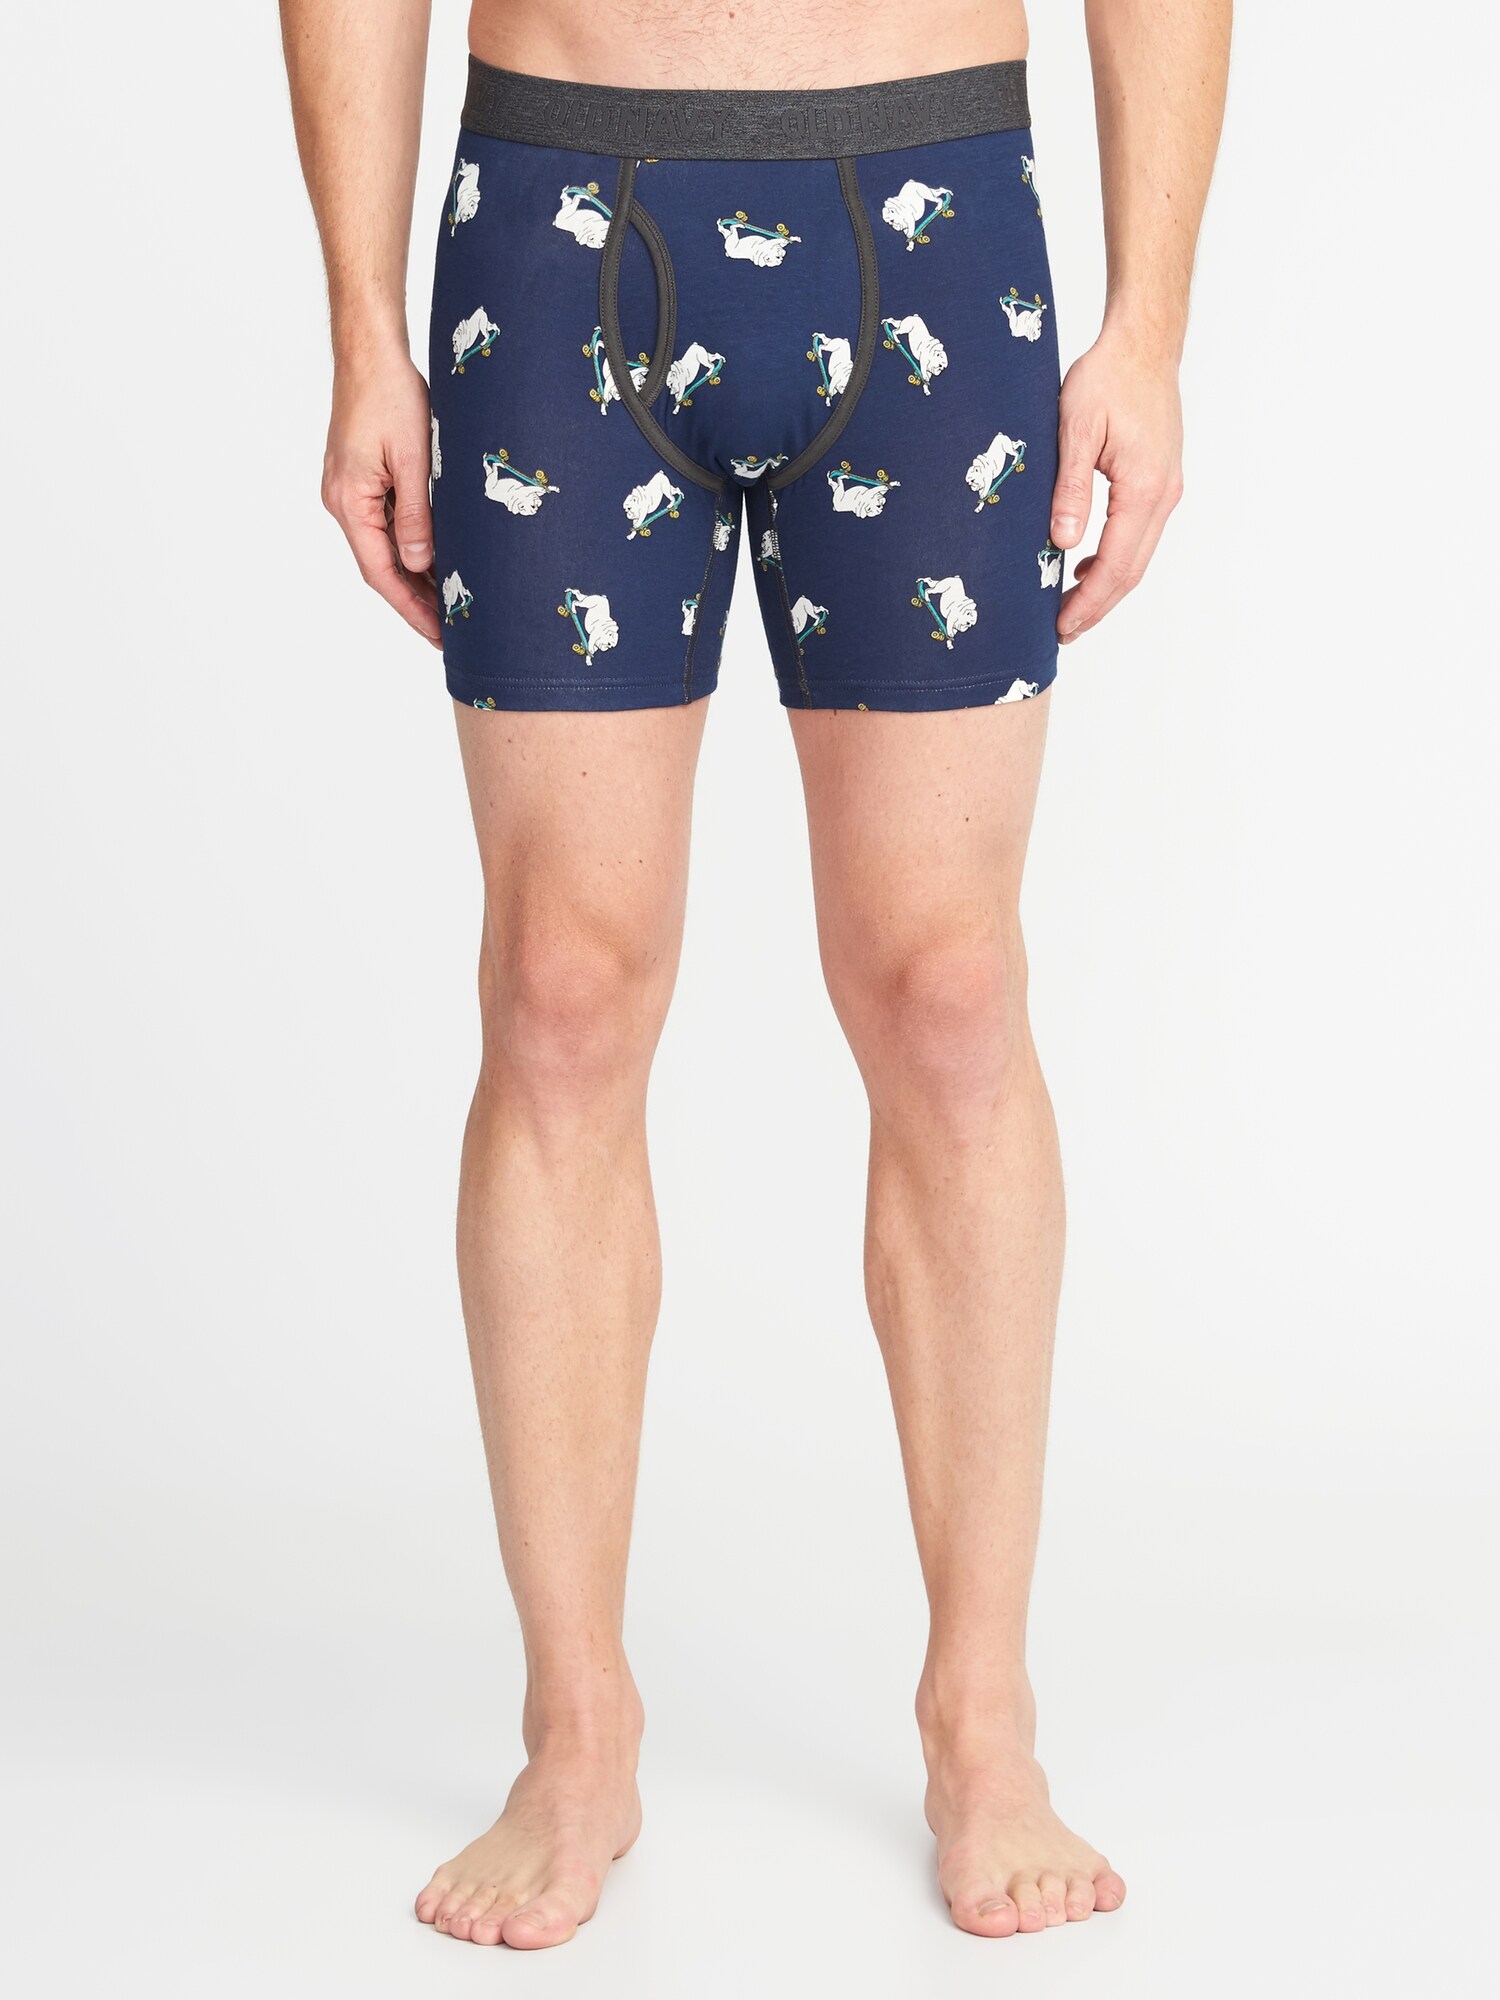 Soft-Washed Printed Boxer Briefs for Men | Old Navy